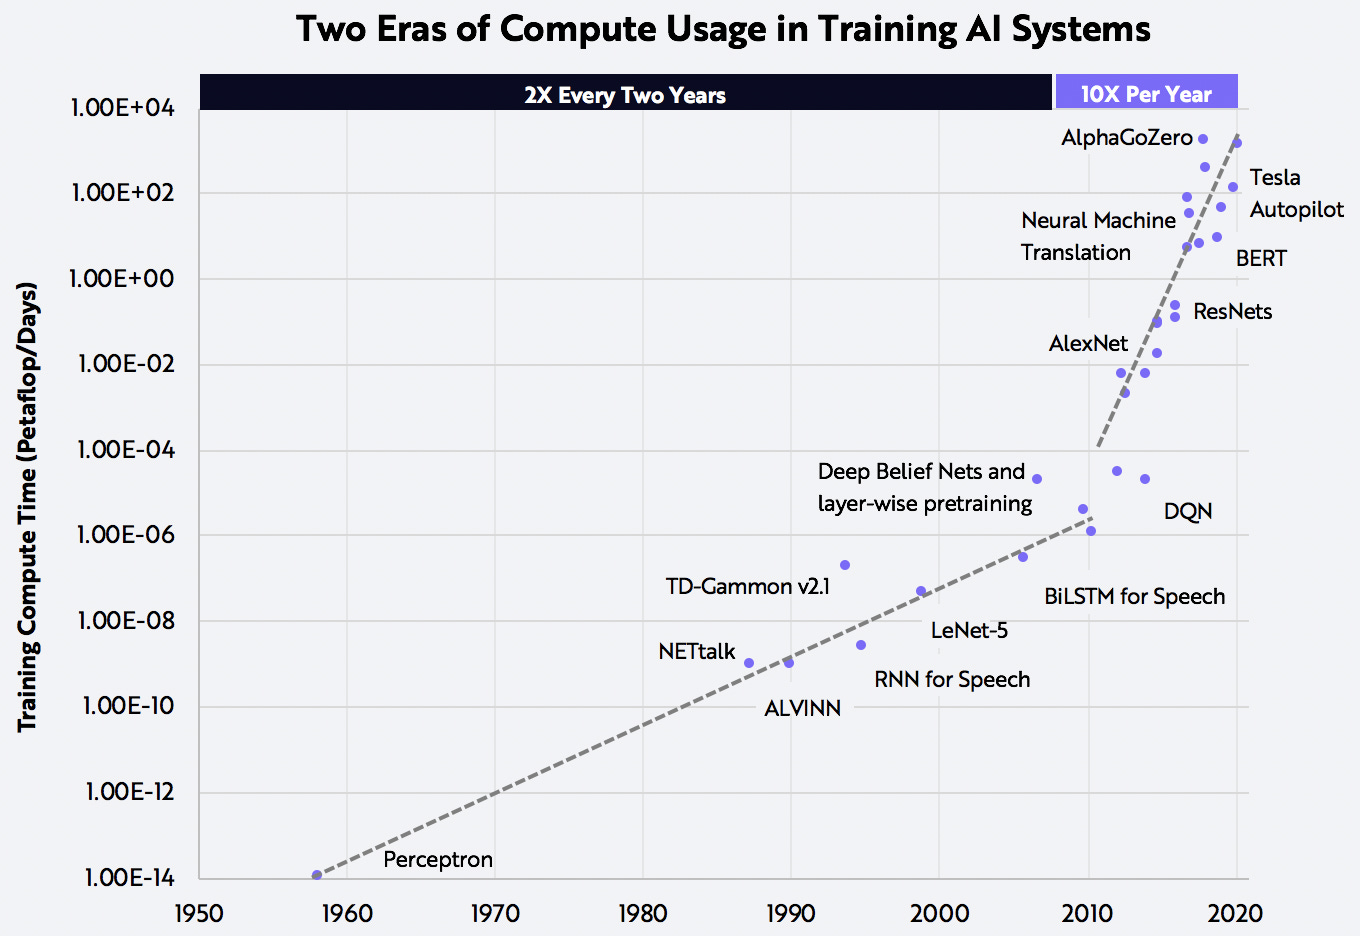 AI Training Costs Are Improving at 50x the Speed of Moore's Law